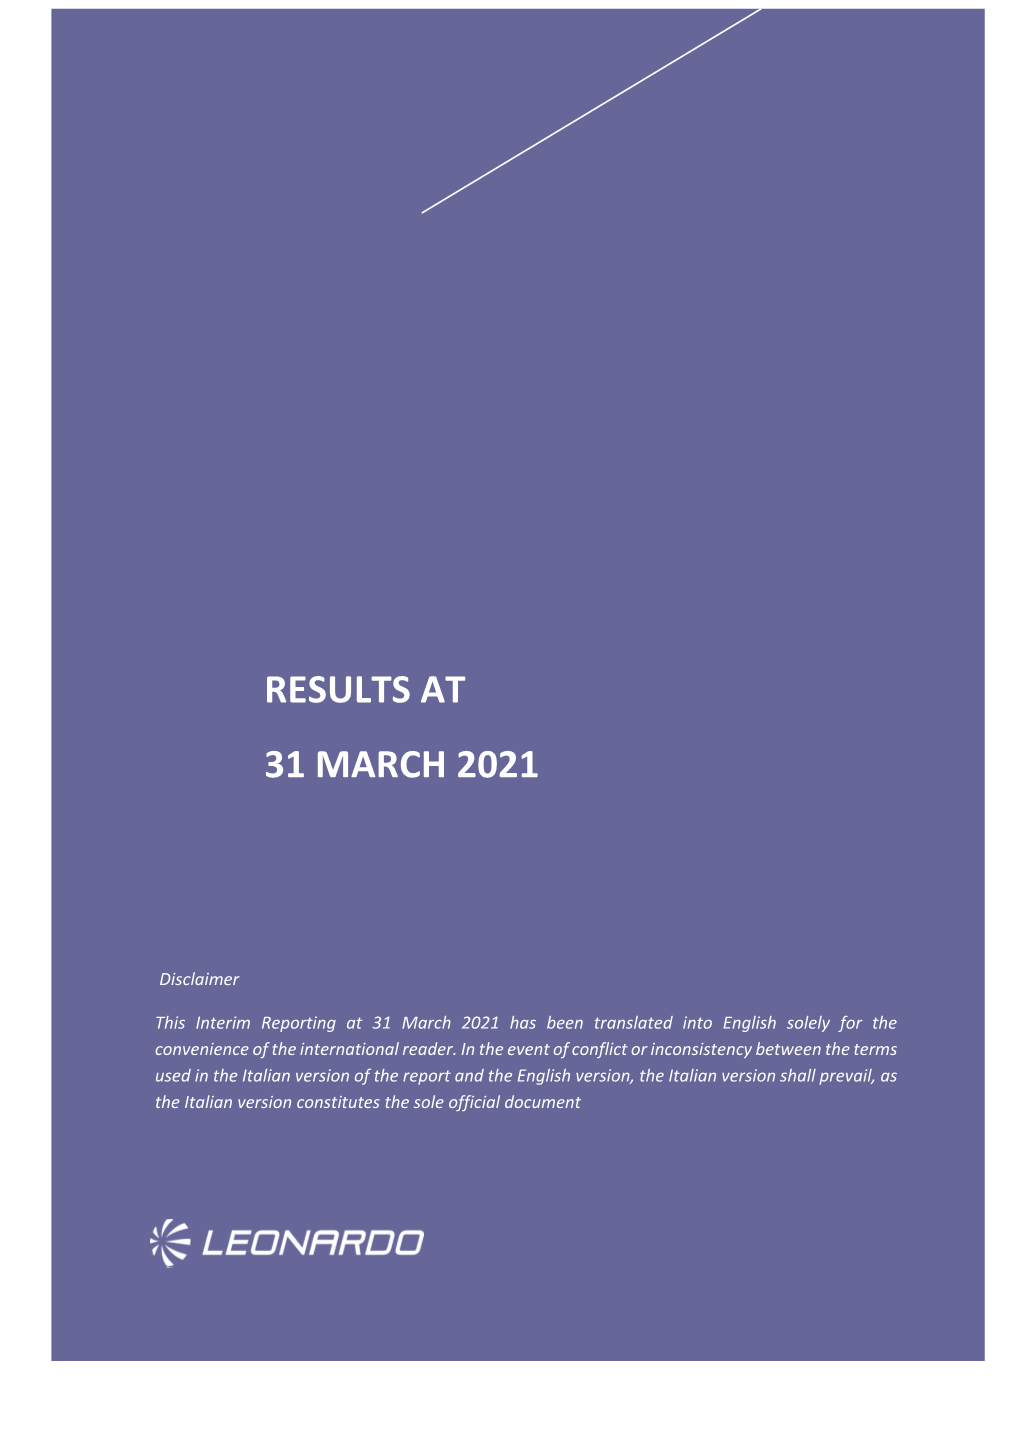 Results at 31 March 2021